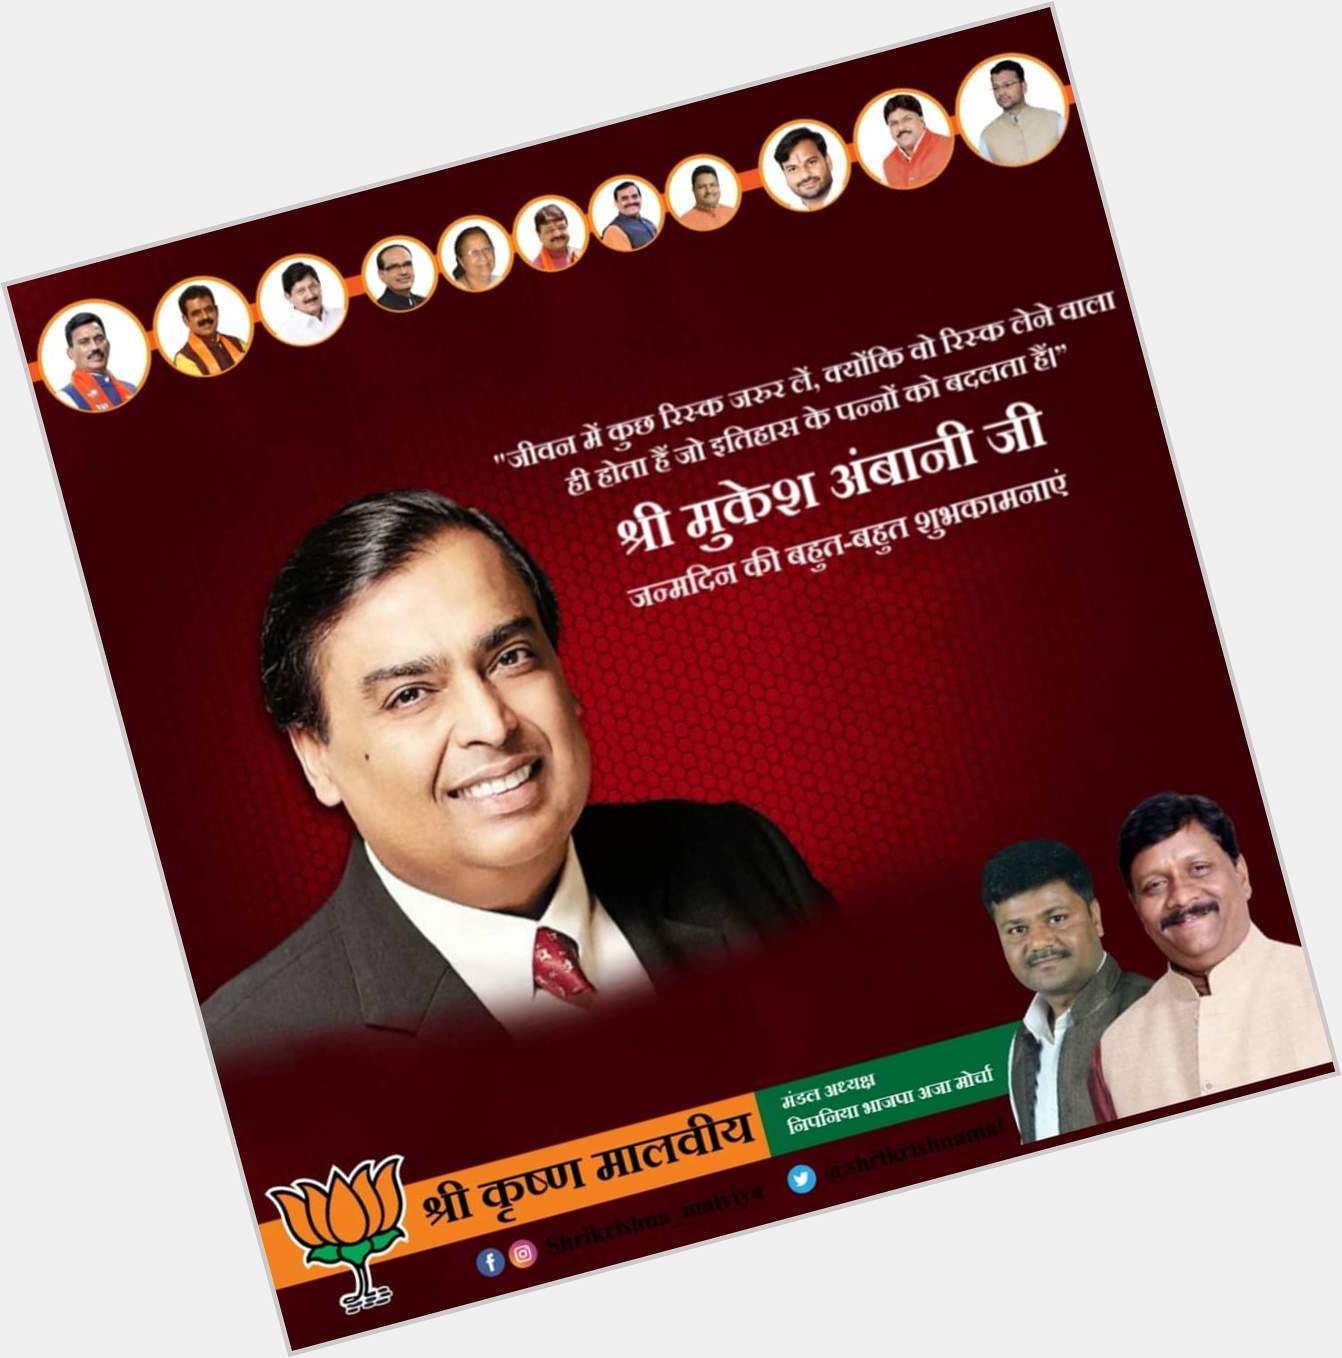 Wishing Shri Mukesh Ambani a very happy birthday! May Lord  bless you with good health and happiness. 